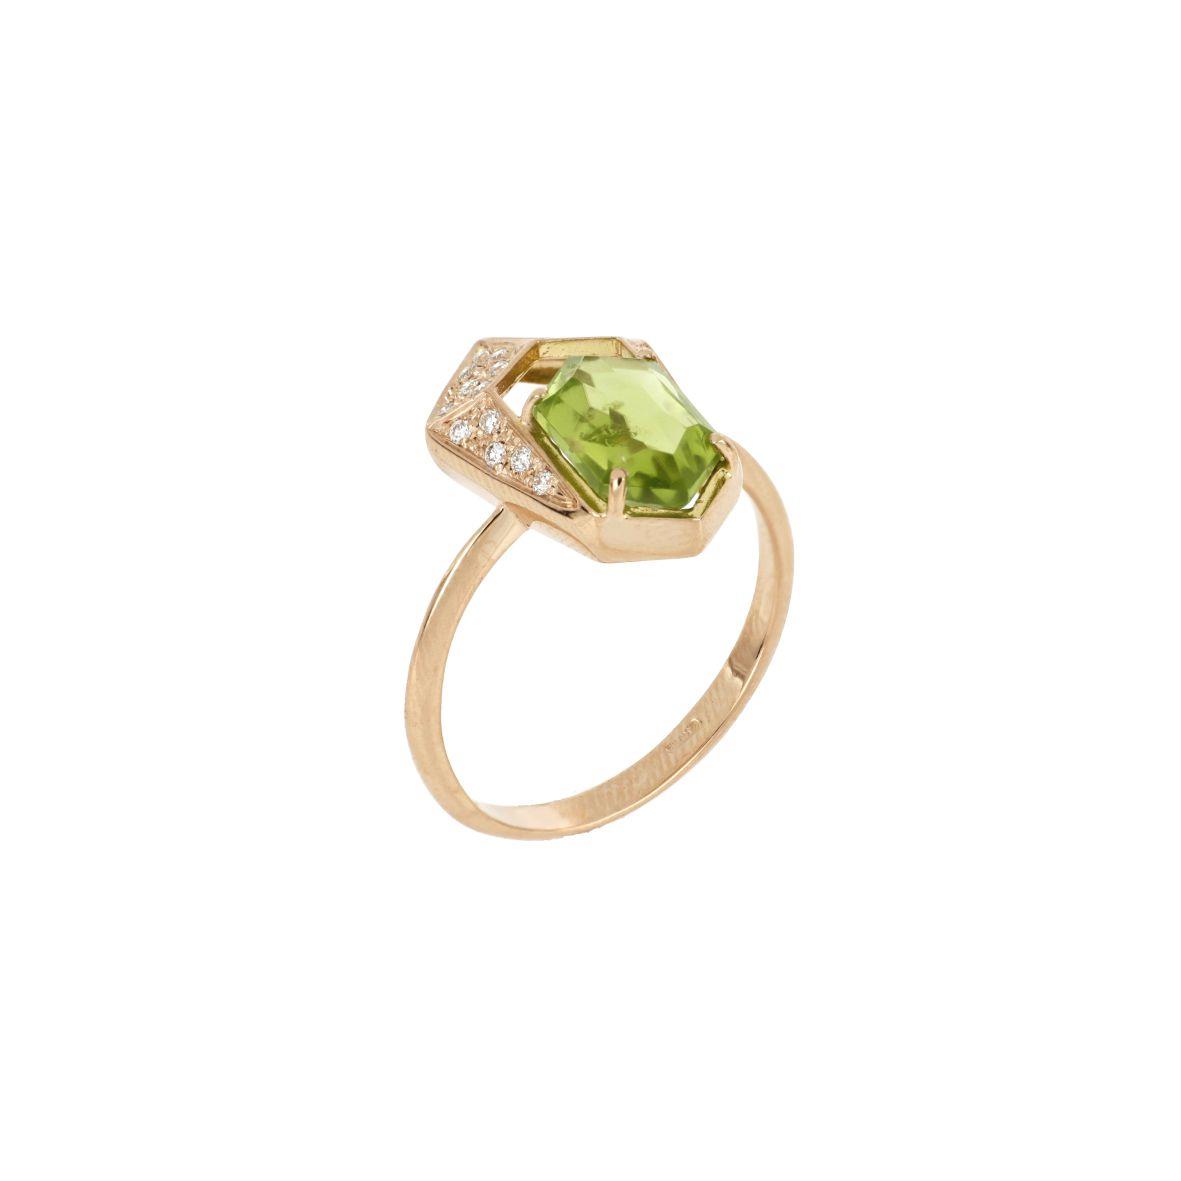 Rose gold ring with peridot and diamonds - GOLD ART